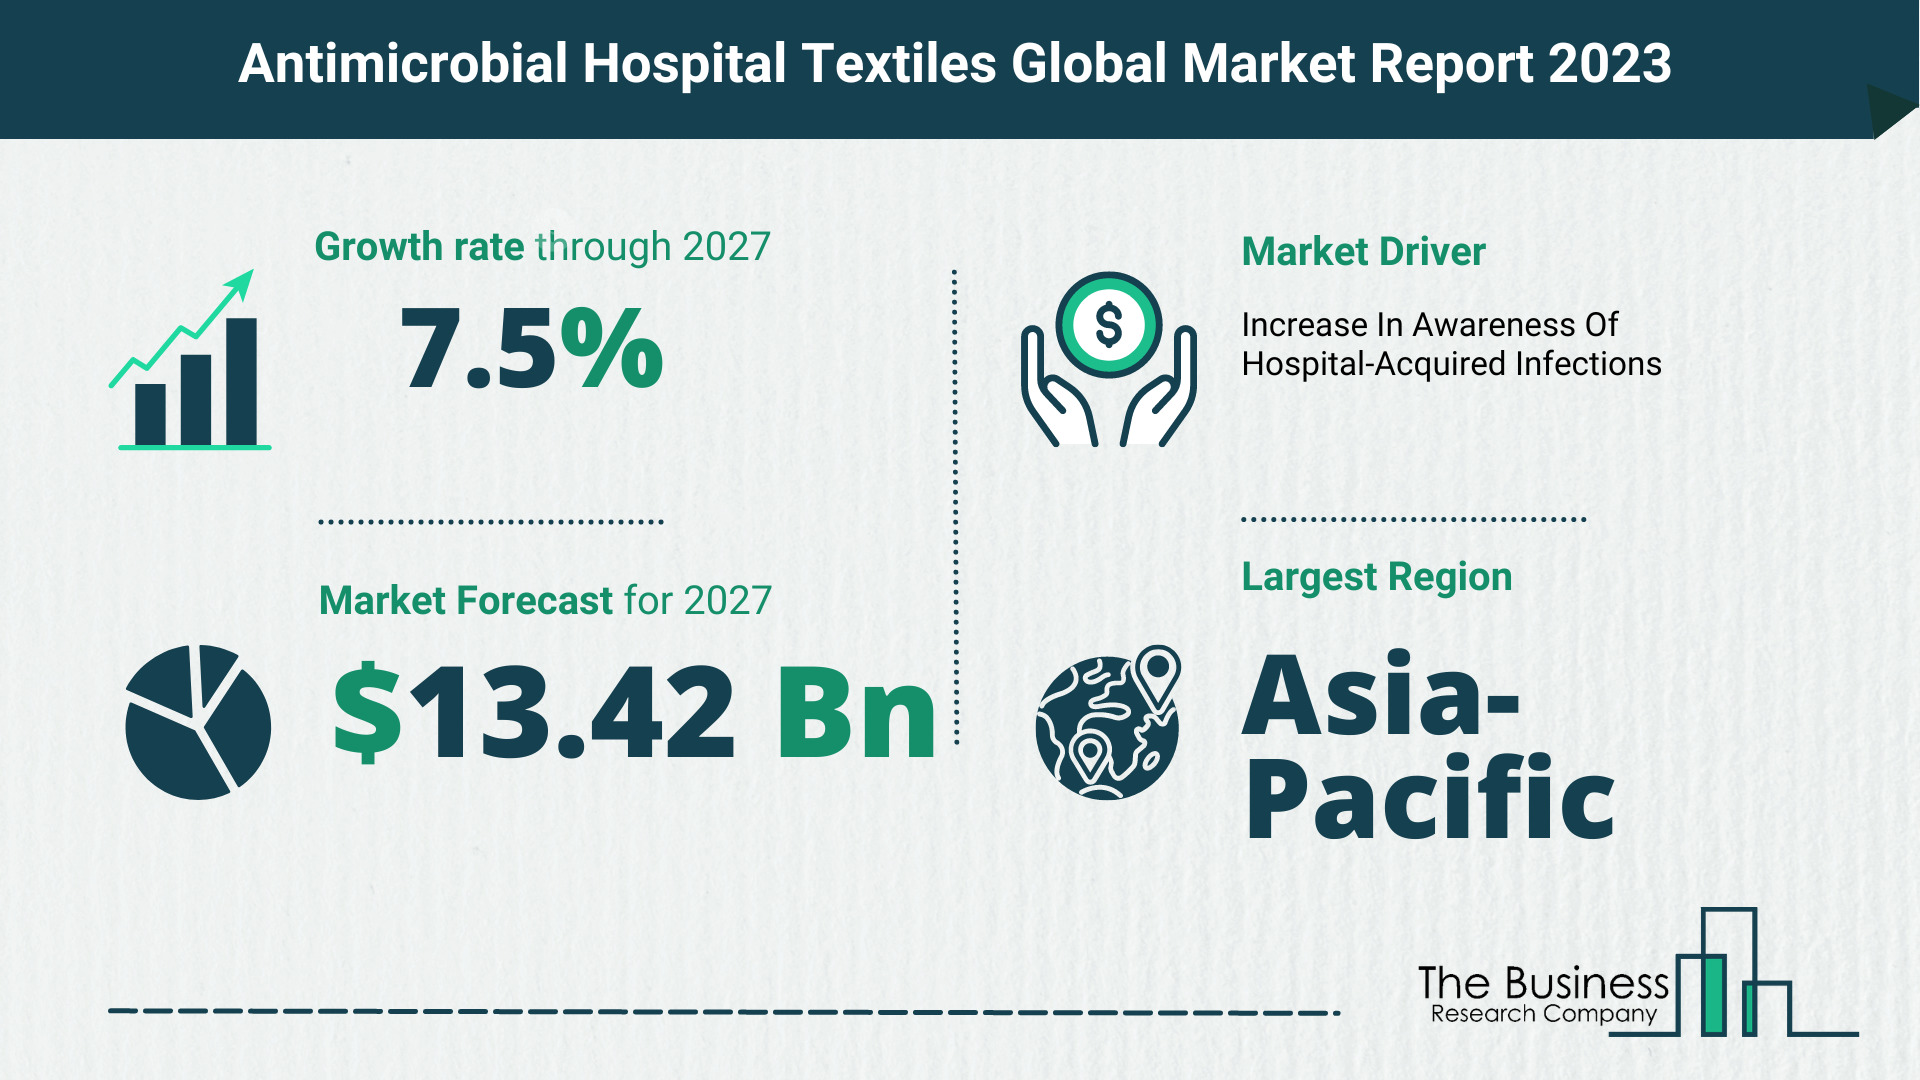 Antimicrobial Hospital Textiles Market Size, Share, And Growth Rate Analysis 2023